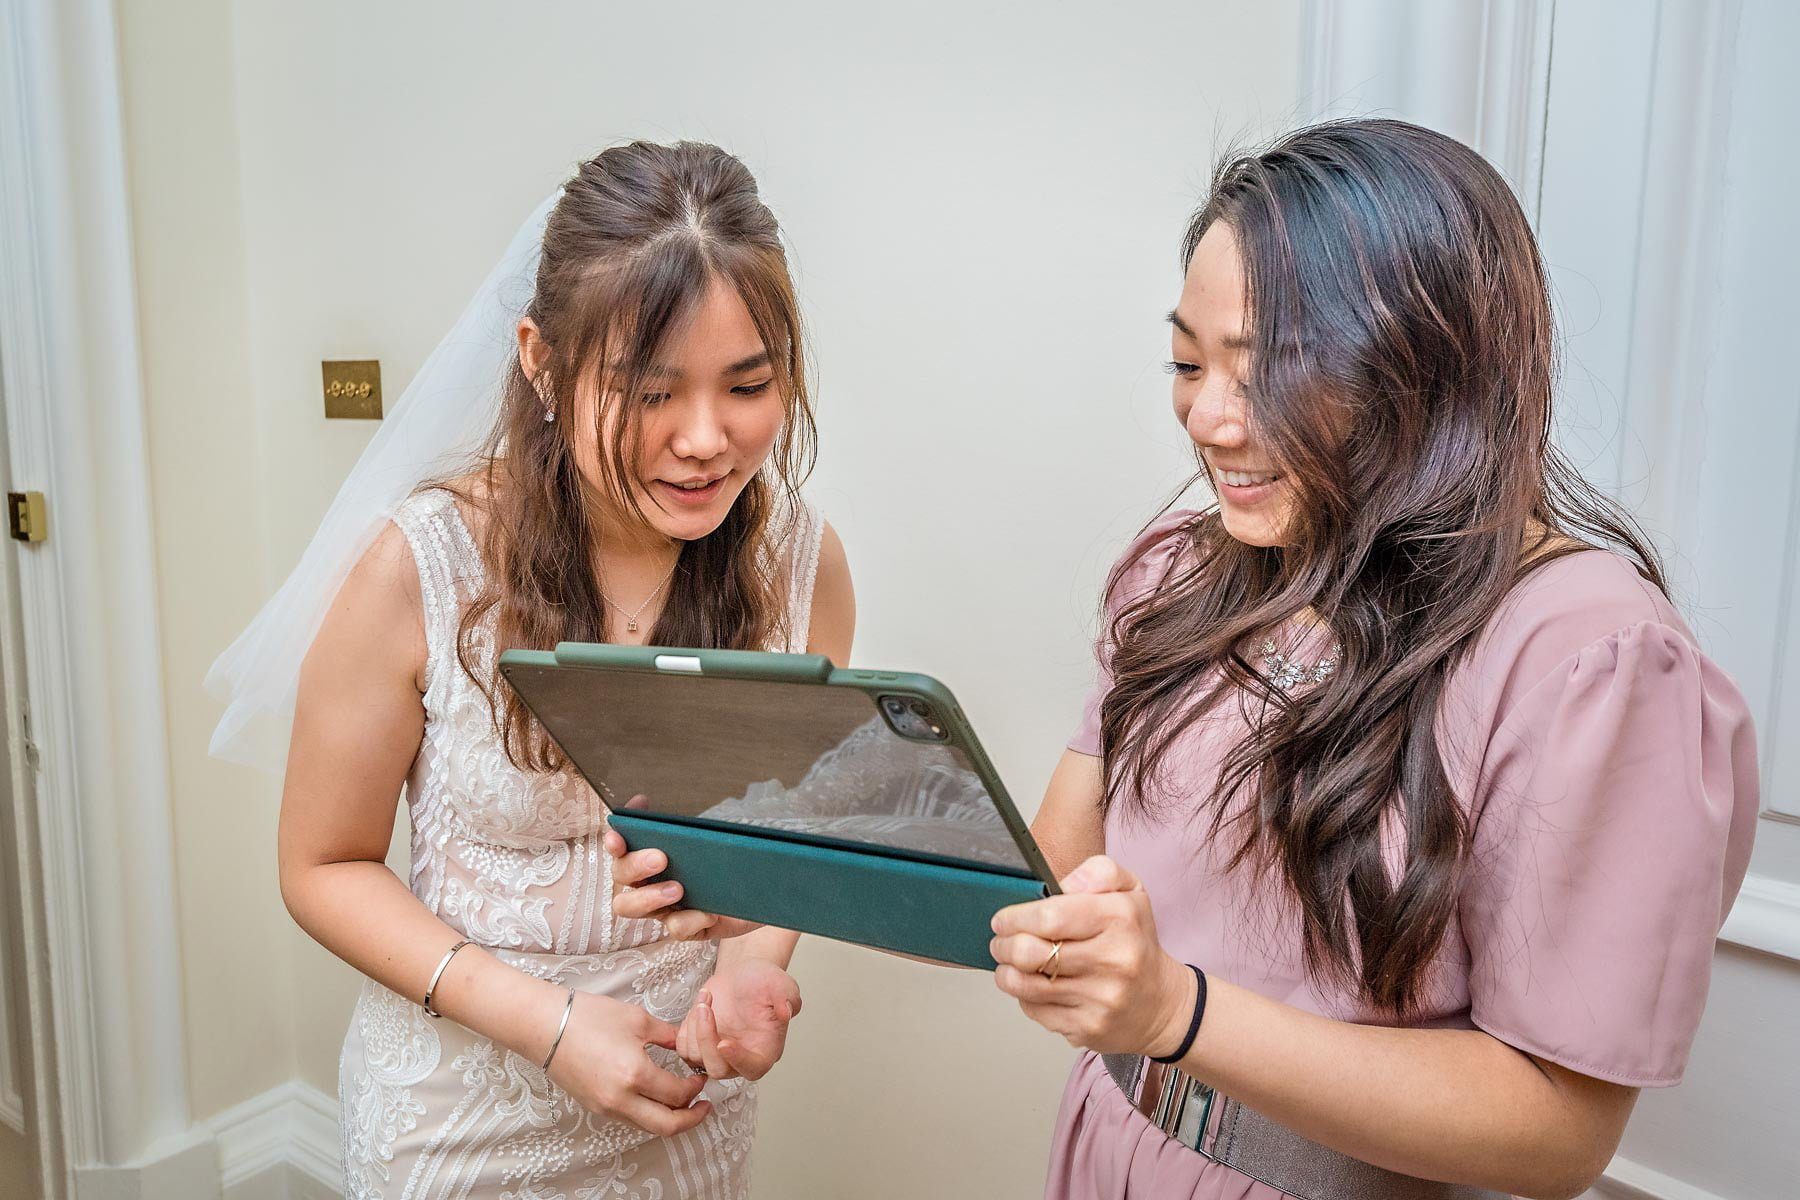 The bride and her sister set up an iPad to record the wedding ceremony at Greenwich Register Office